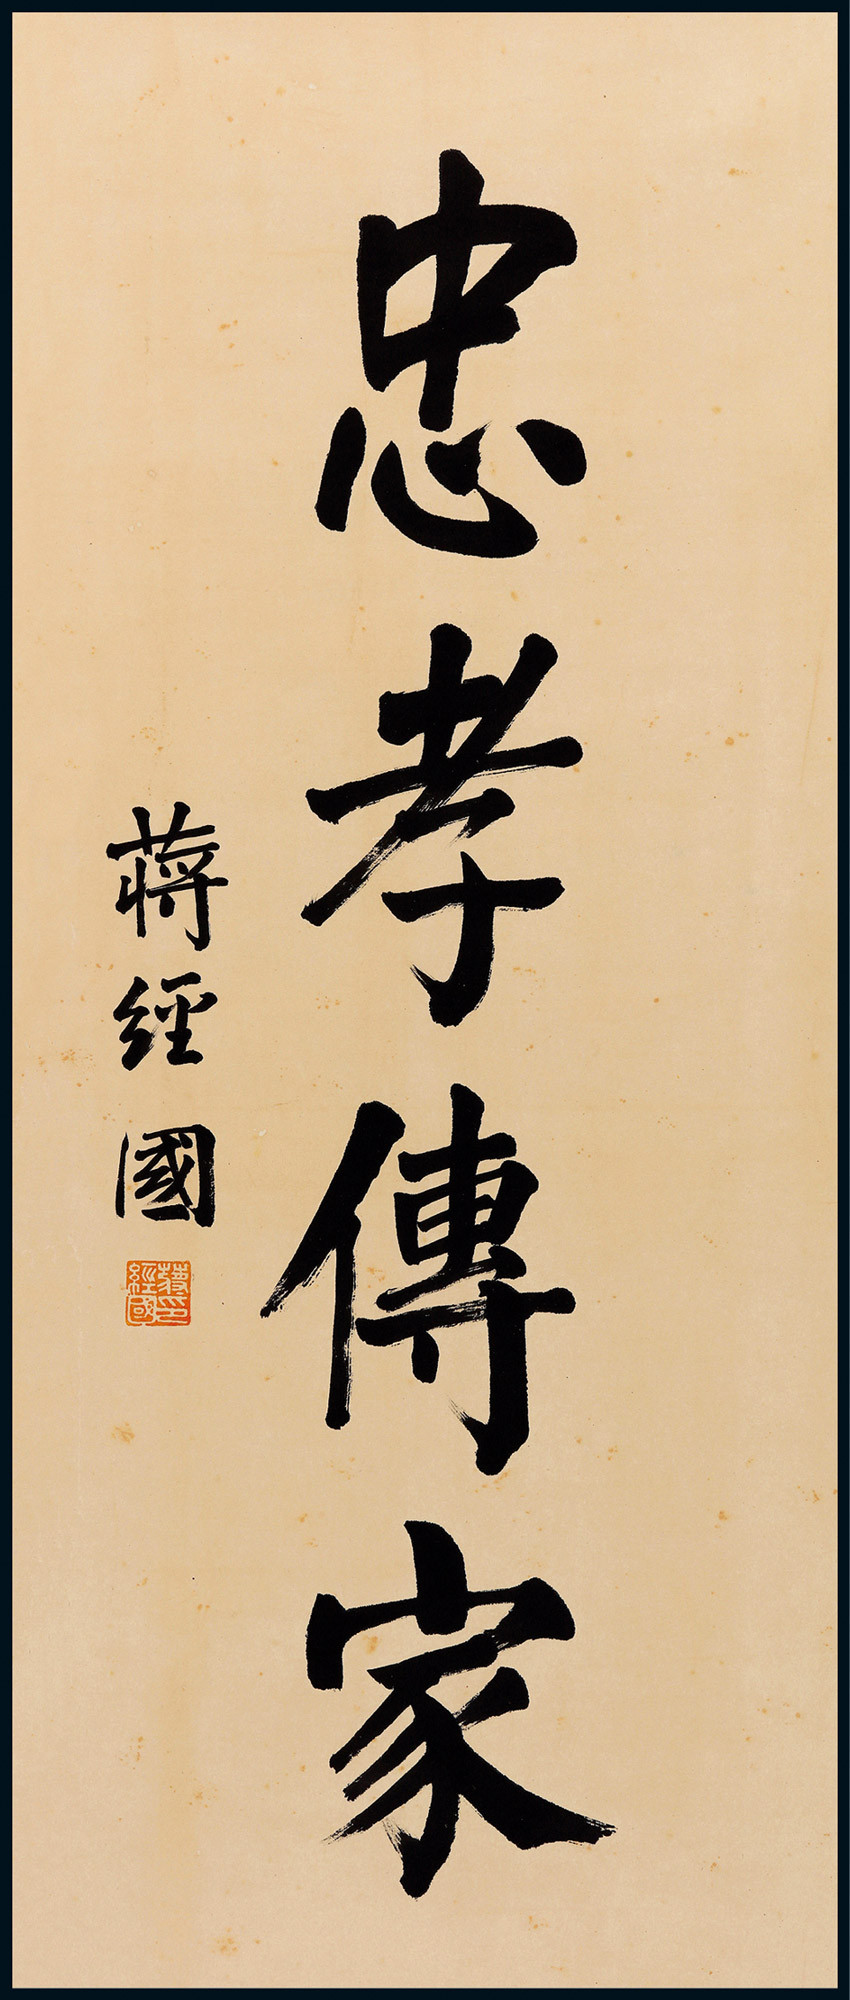 The calligraphy of Chiang Ching-kuo